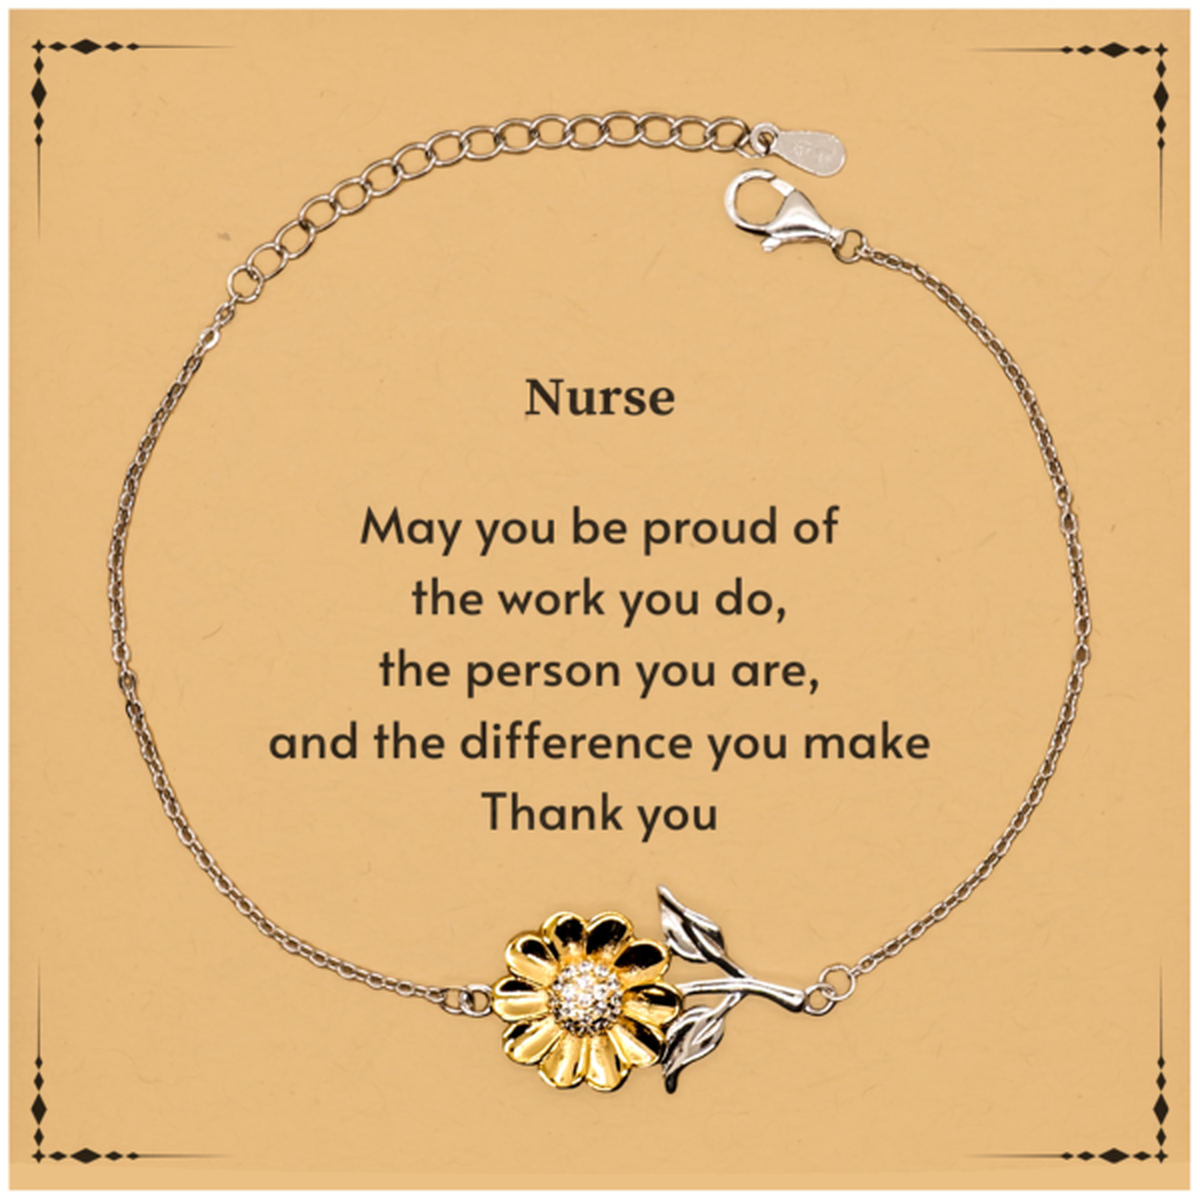 Heartwarming Sunflower Bracelet Retirement Coworkers Gifts for Nurse, Nurse May You be proud of the work you do, the person you are Gifts for Boss Men Women Friends